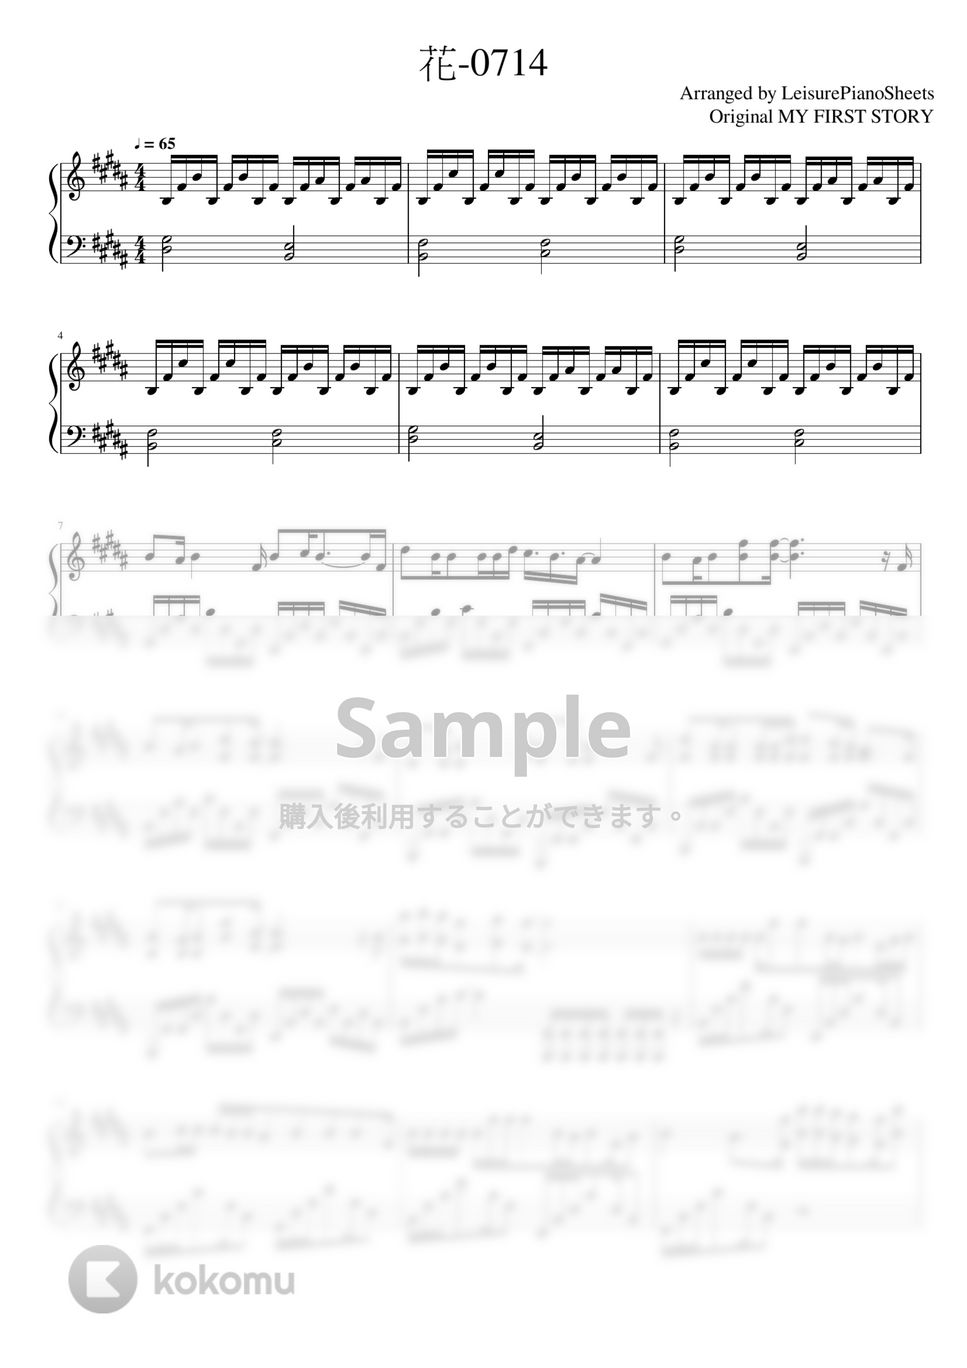 MY FIRST STORY - 花 0714 by Leisure (OOR Piano) Sheets